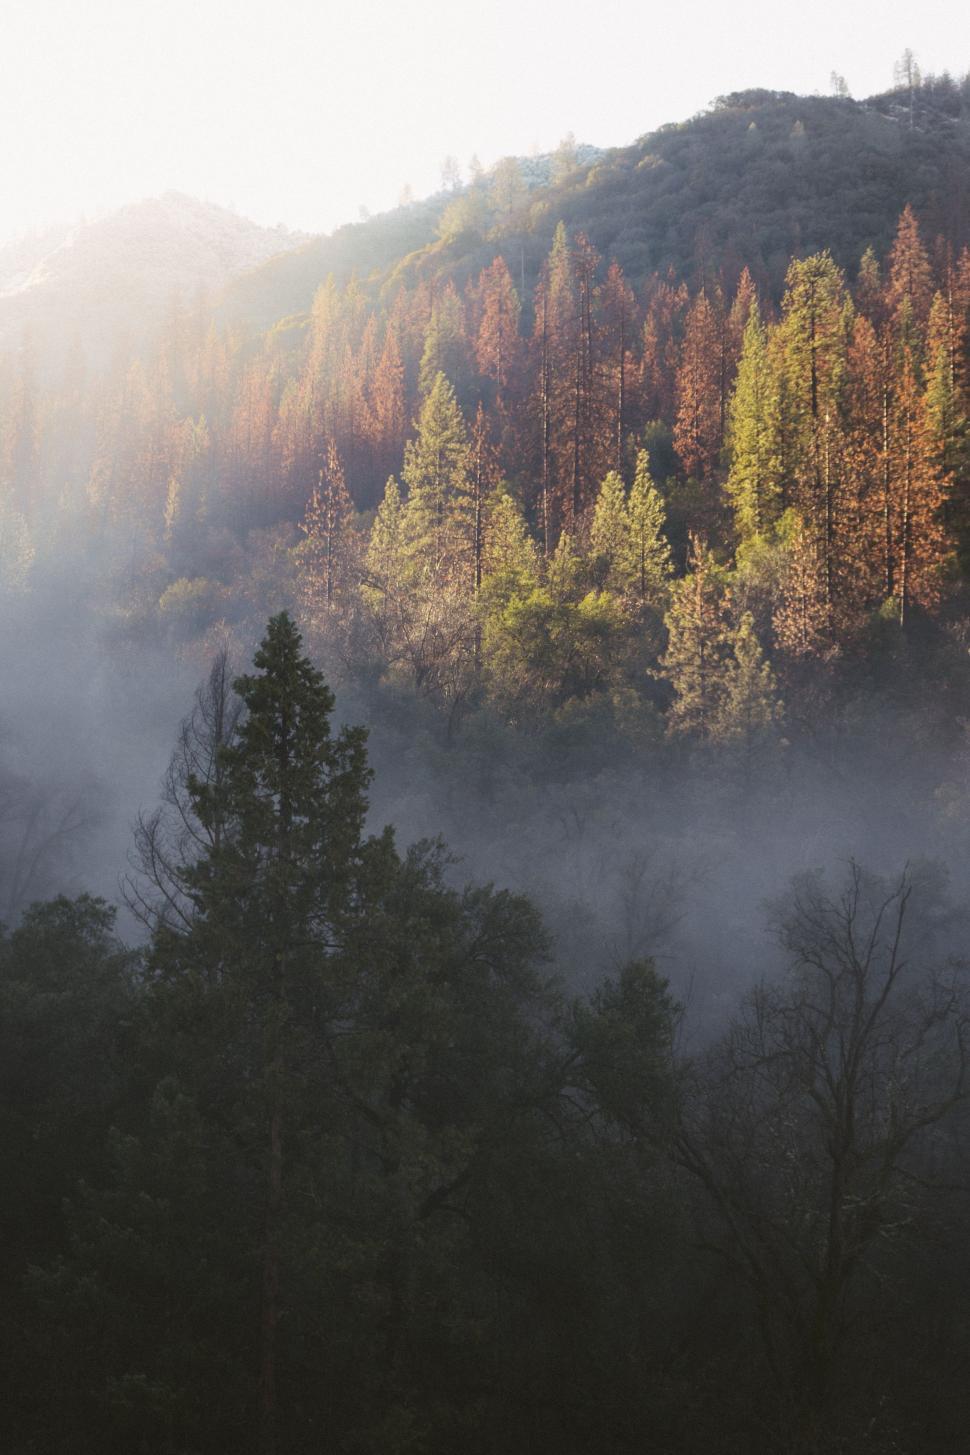 Free Image of Foggy Forest With Trees and Mountains 